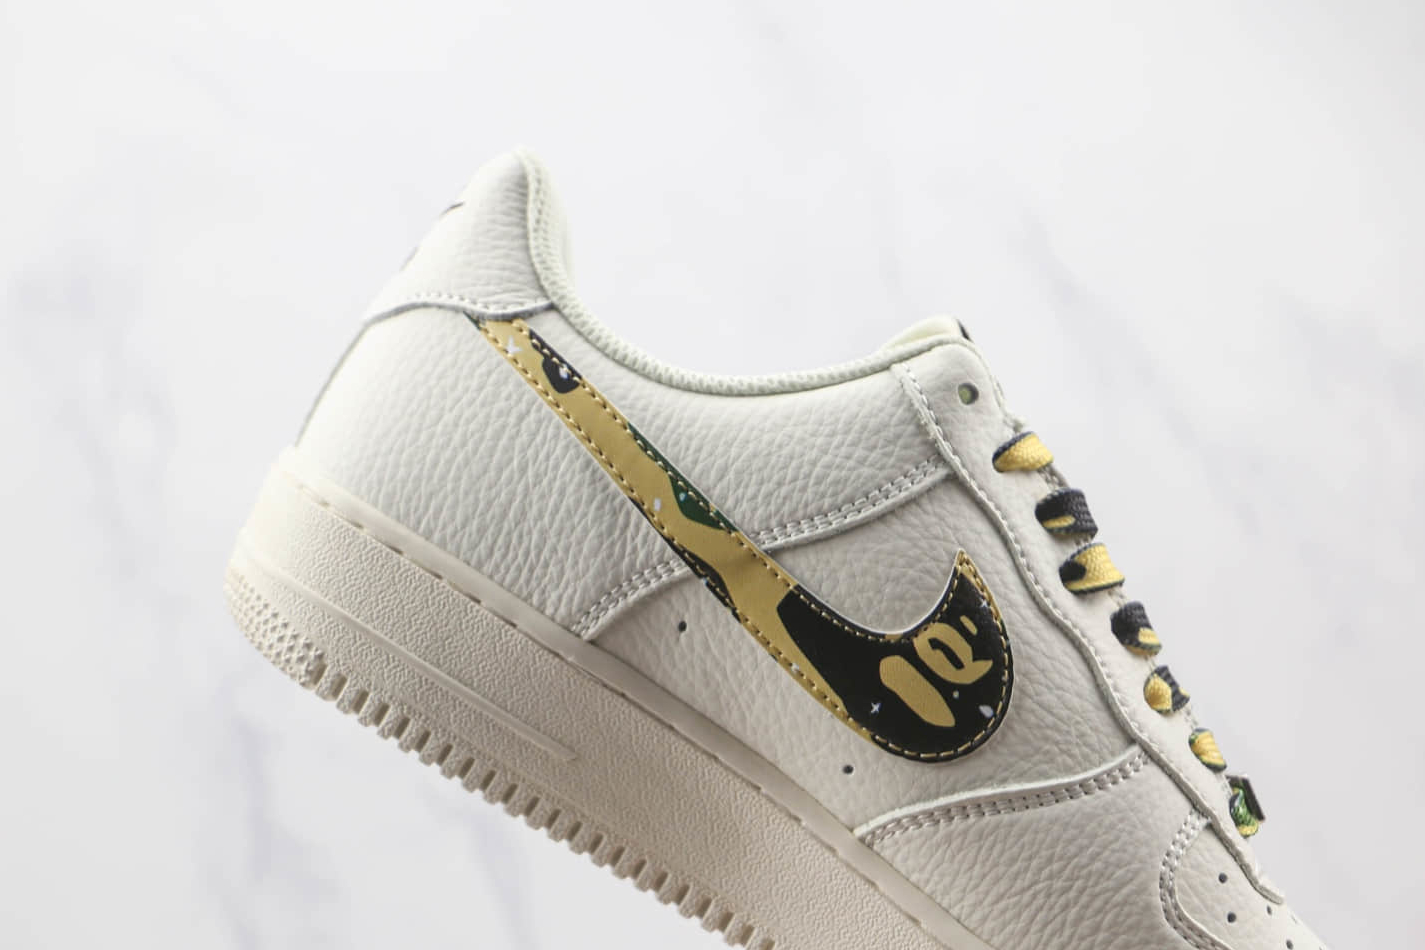 Bape x Nike Air Force 1 07 Low Camo White Green - Authentic Collab | AA1365-118